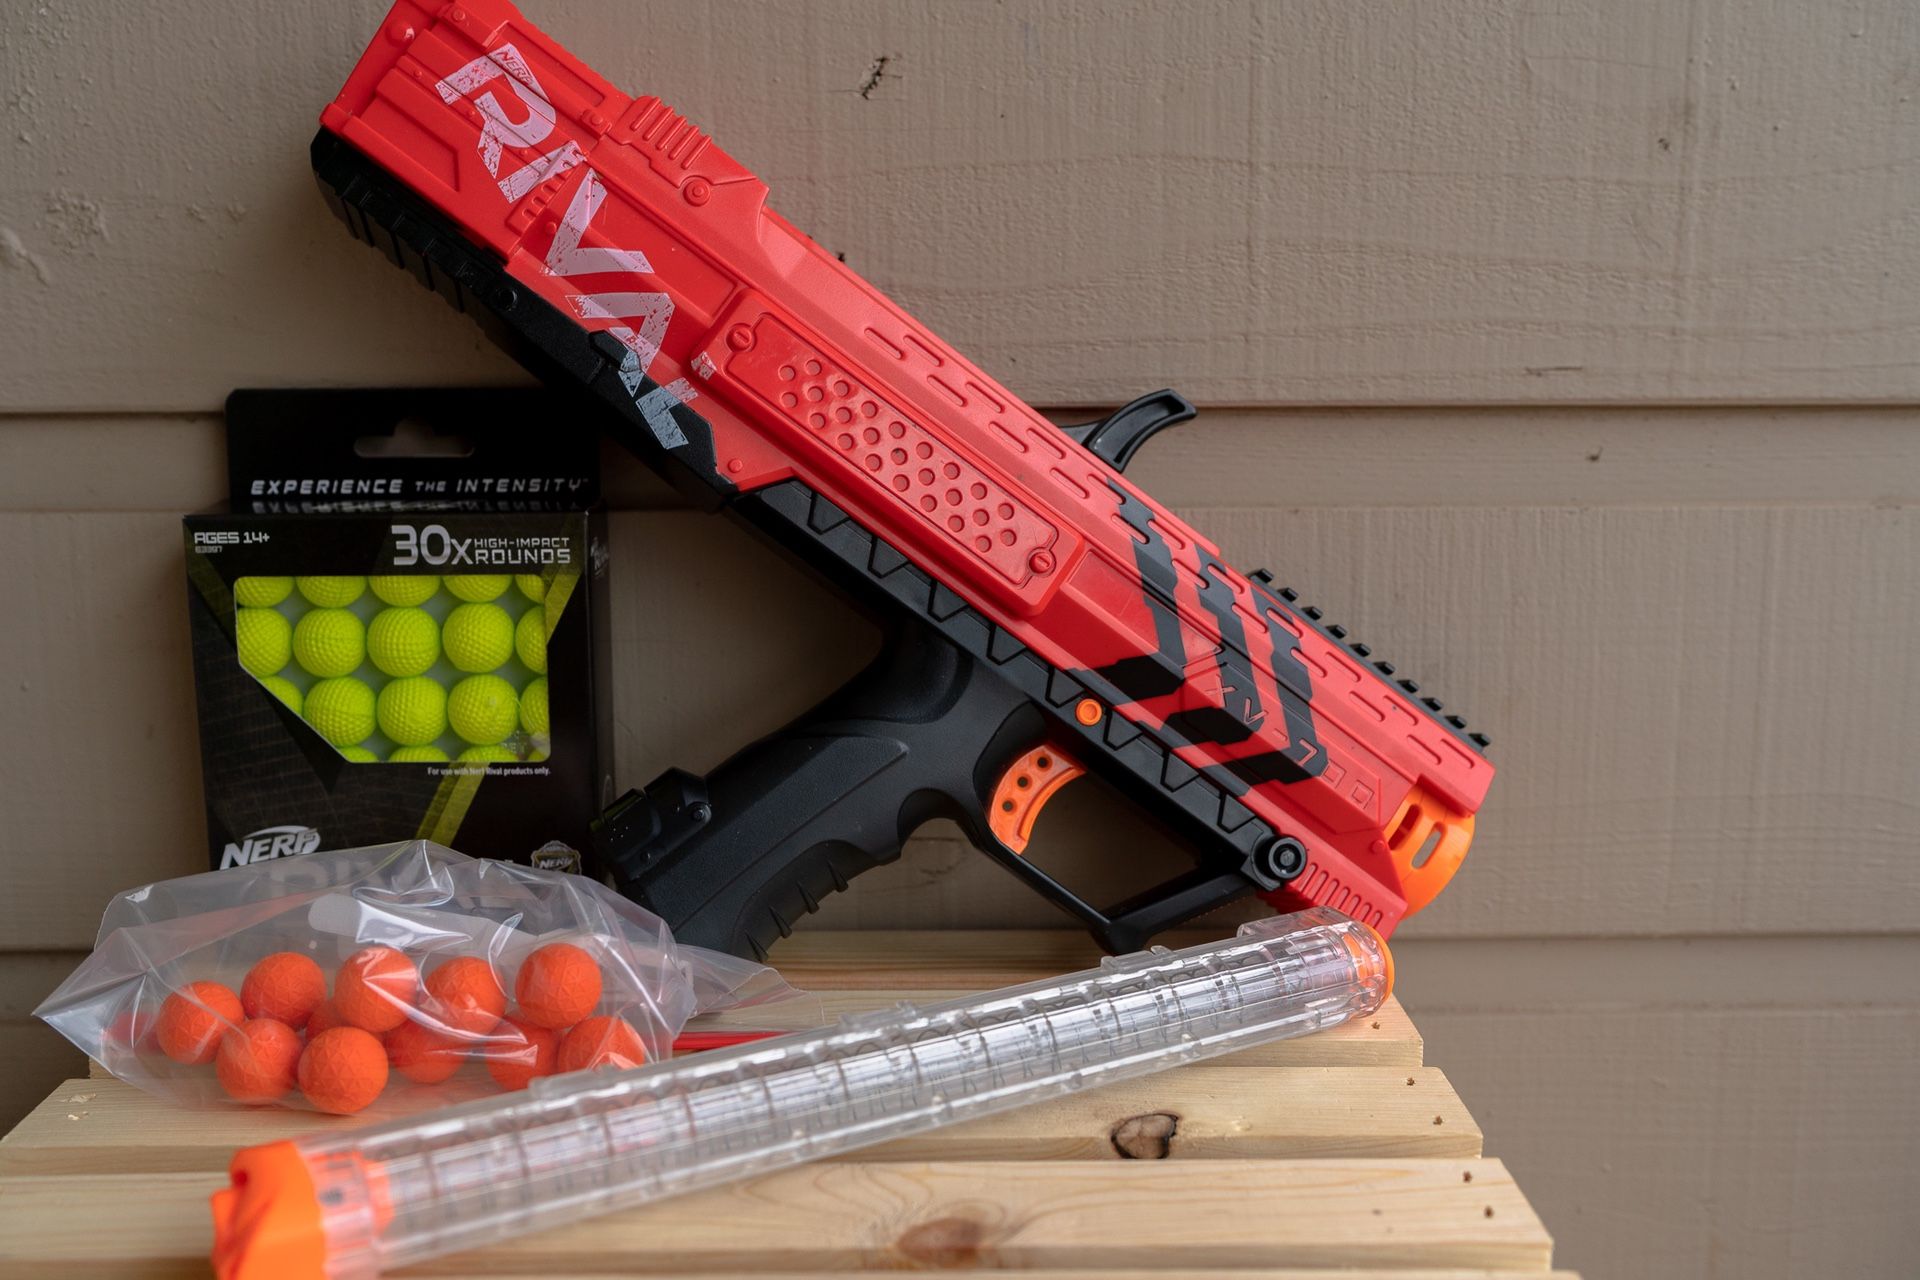 Red NERF gun with 30 special rounds and more